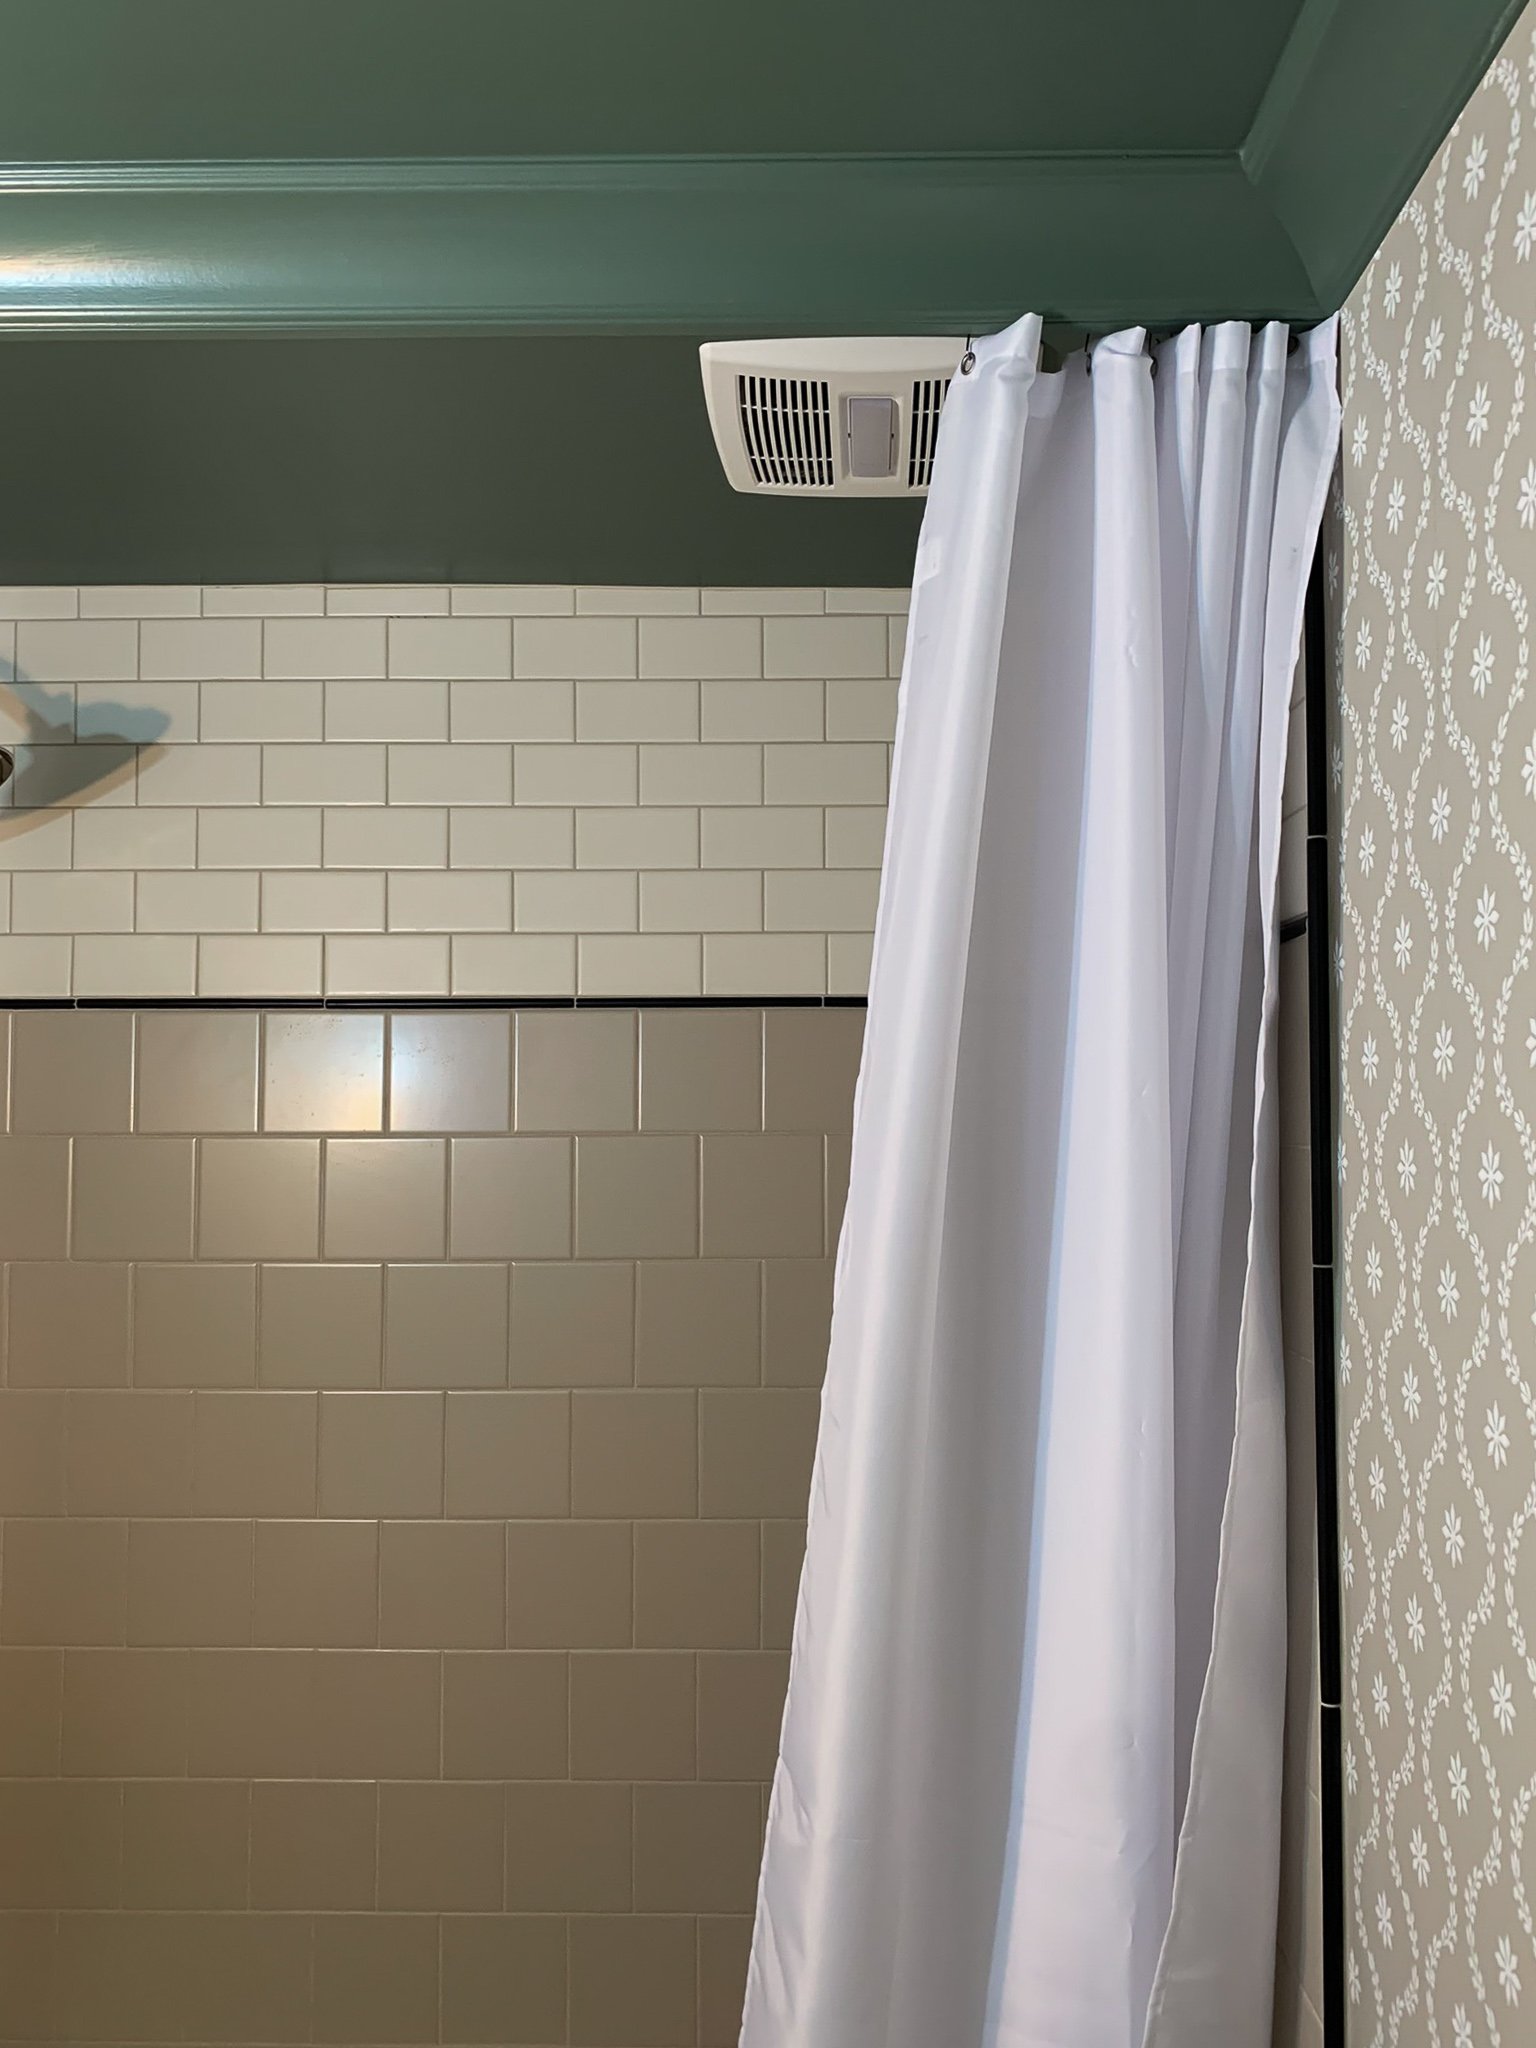 shower curtain on a ceilling mounted track that is hidden behind a crown moulding valence.  Subway tile shower in background